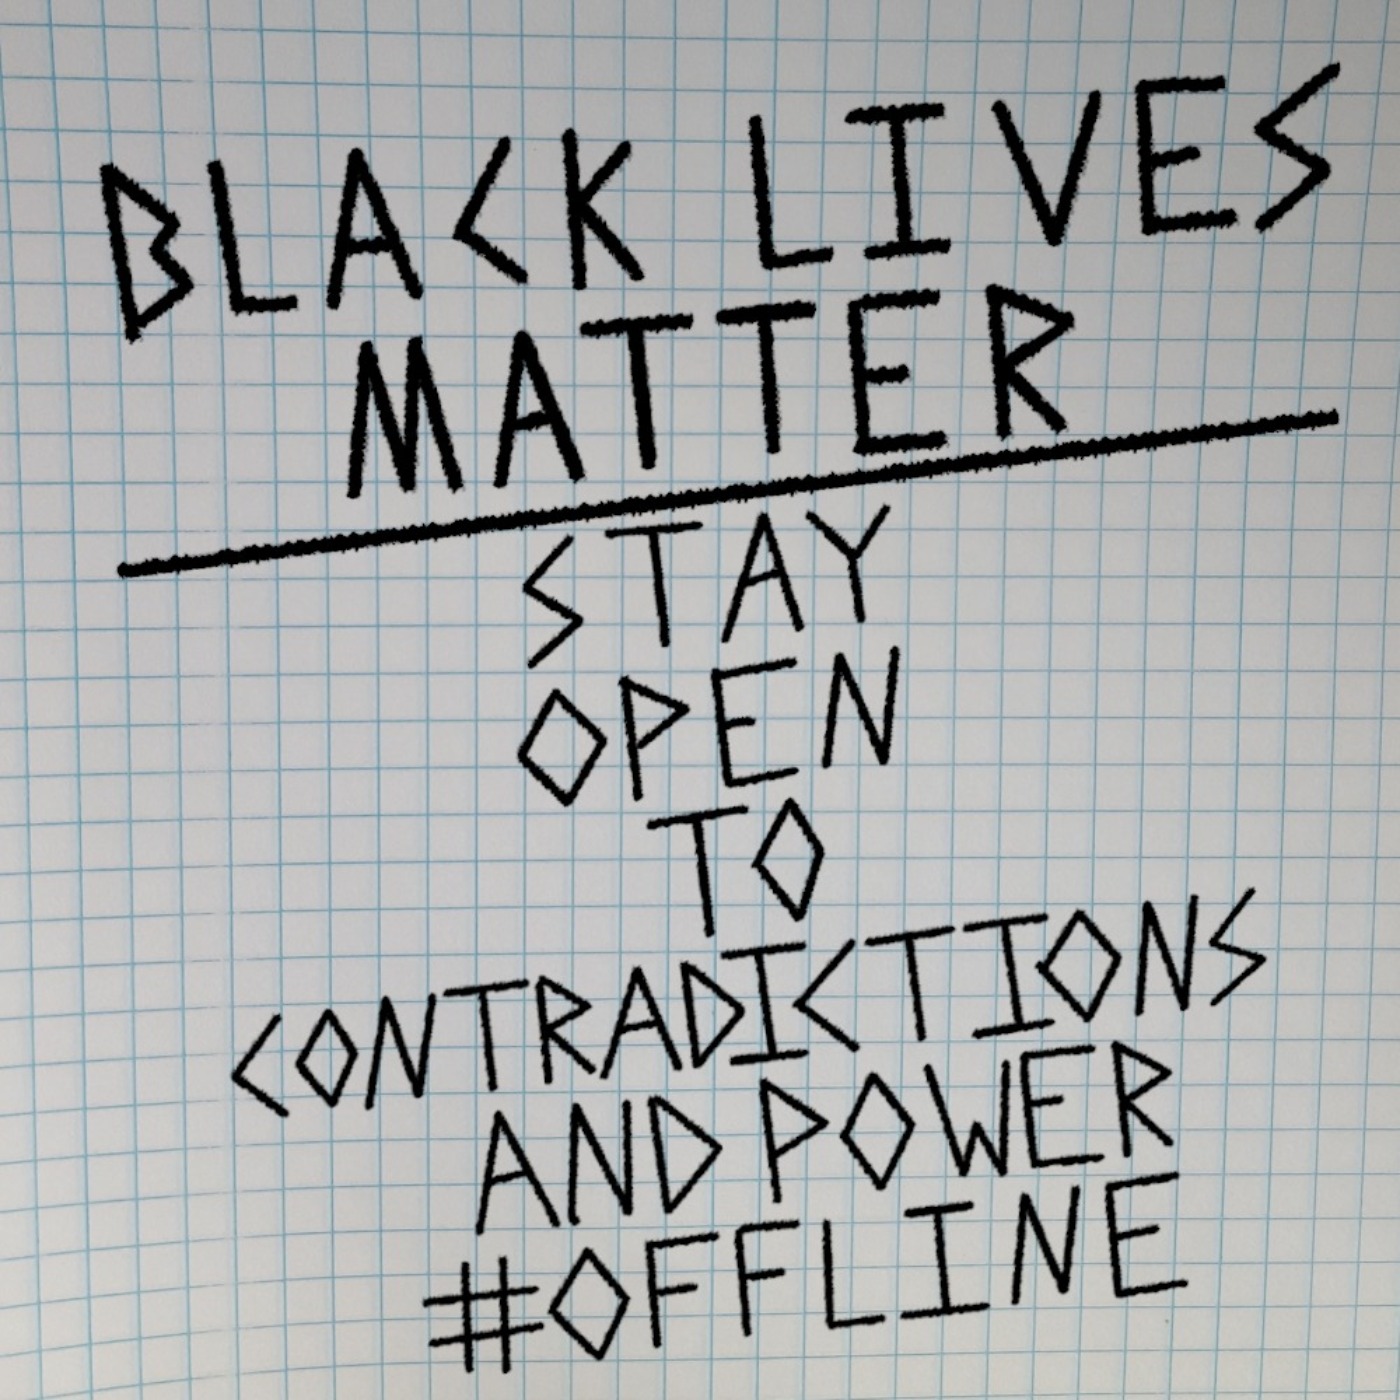 cover art for Black Lives Matter - Stay Open to Contradictions and Power #offline